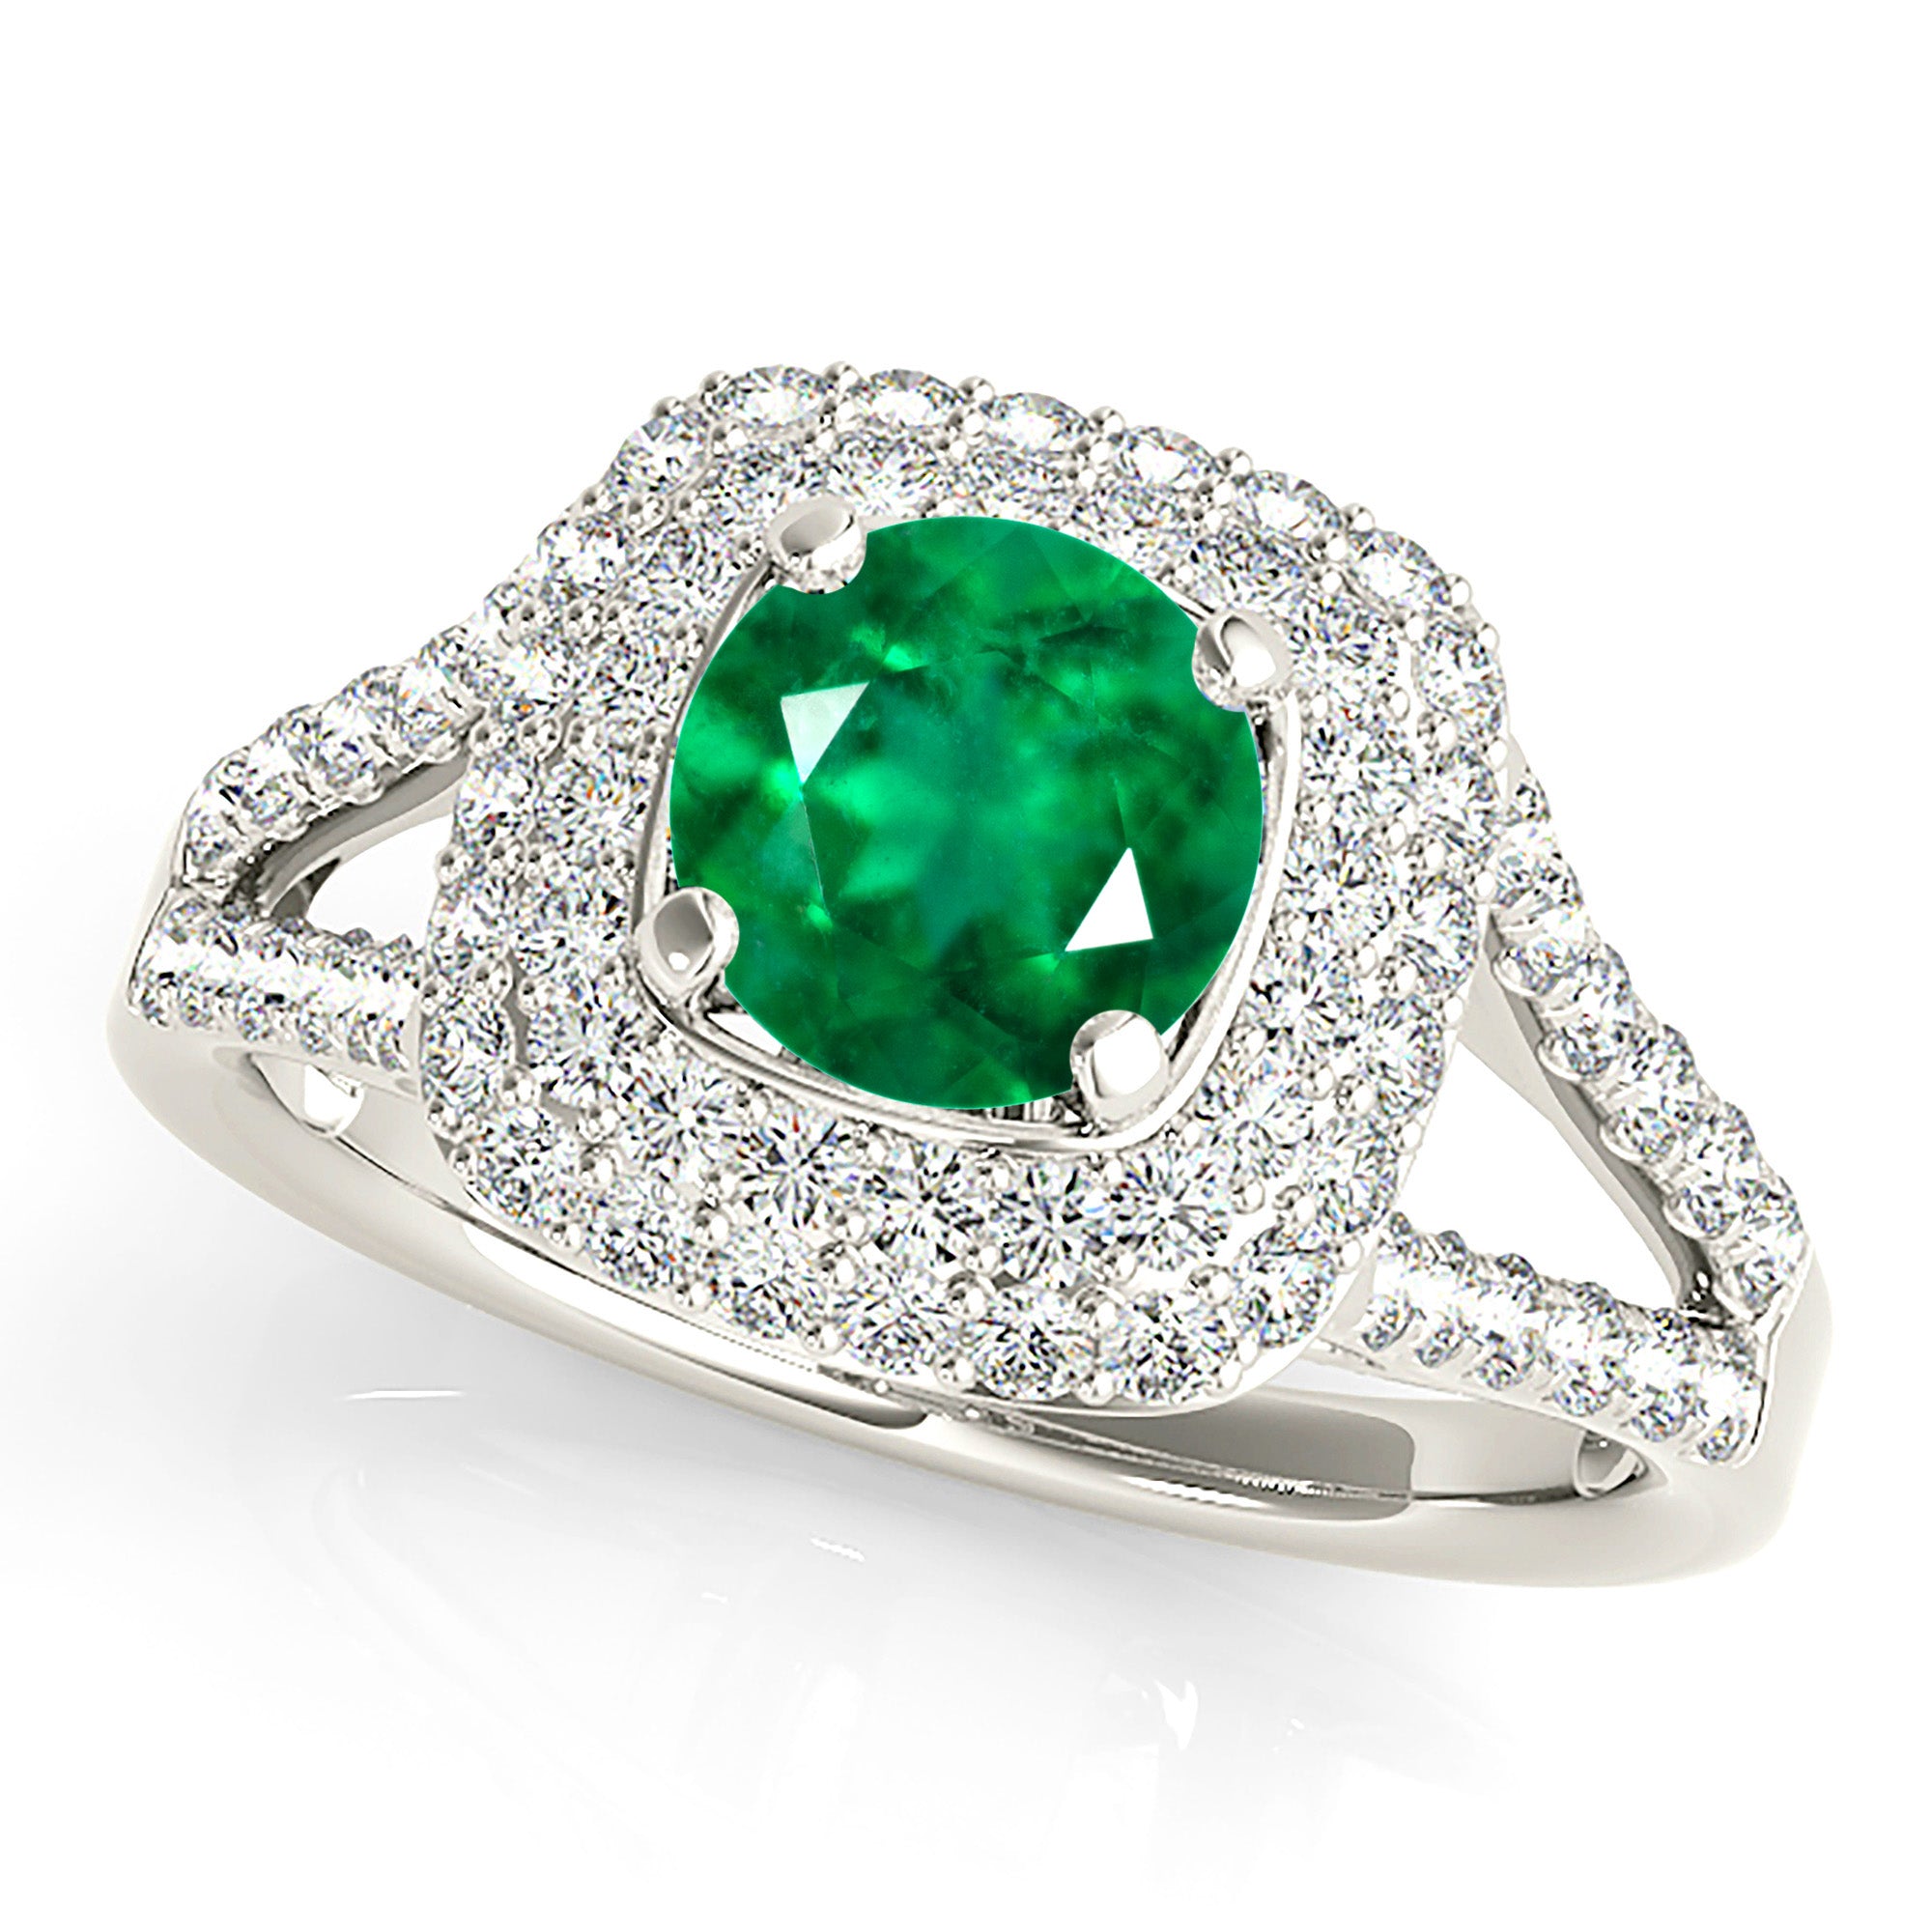 1.14 ct. Genuine Emerald Ring With 0.70 ctw. Double Row Diamond Halo,Wide Split Diamond Band-in 14K/18K White, Yellow, Rose Gold and Platinum - Christmas Jewelry Gift -VIRABYANI